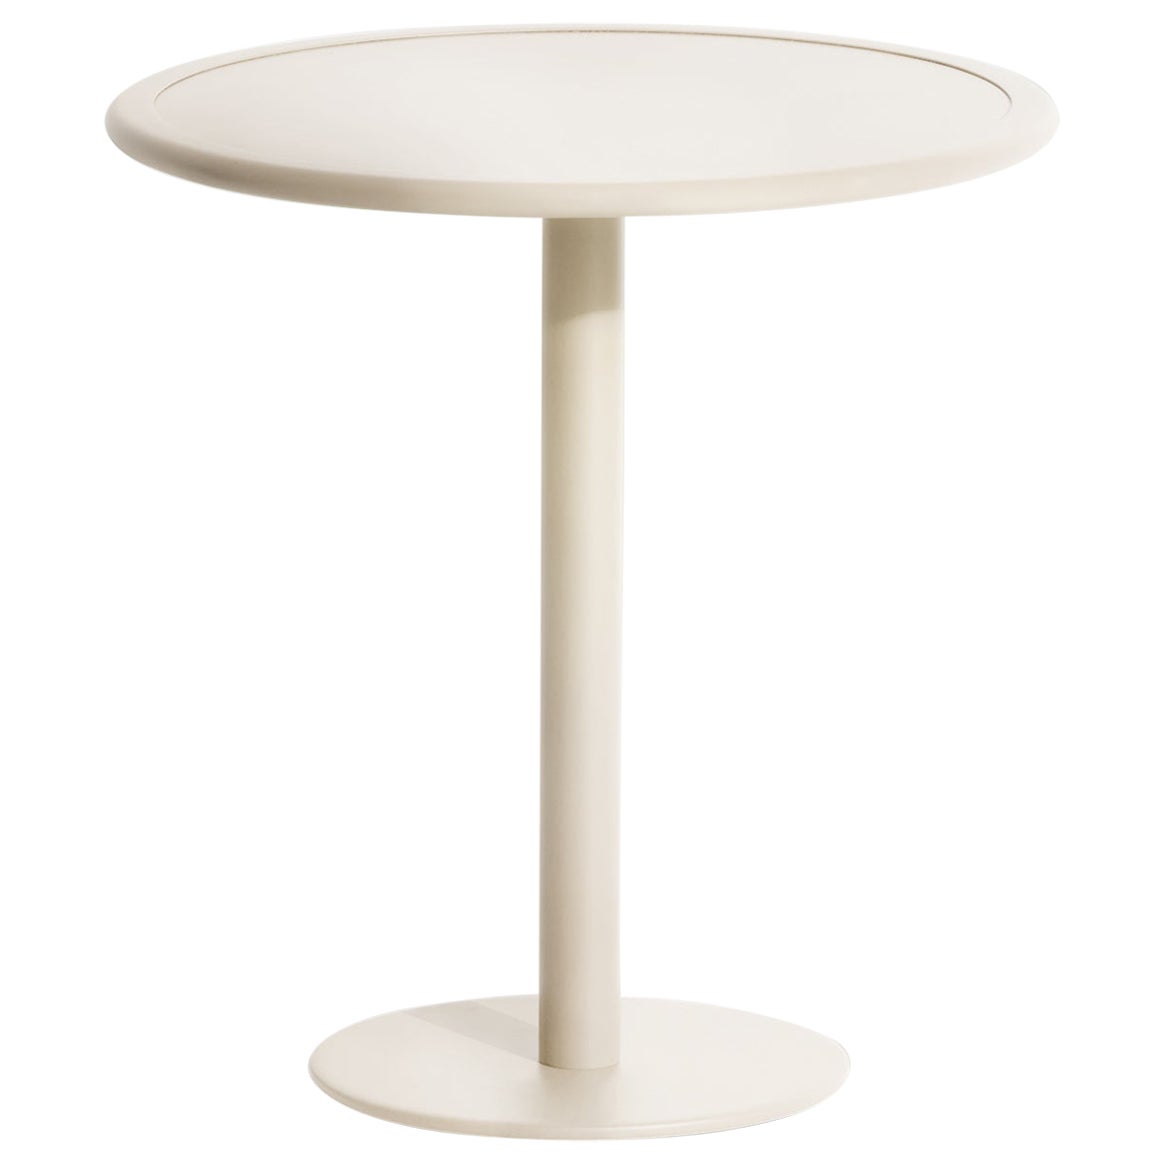 Petite Friture Week-End Bistro Round Dining Table in Ivory Aluminium, 2017